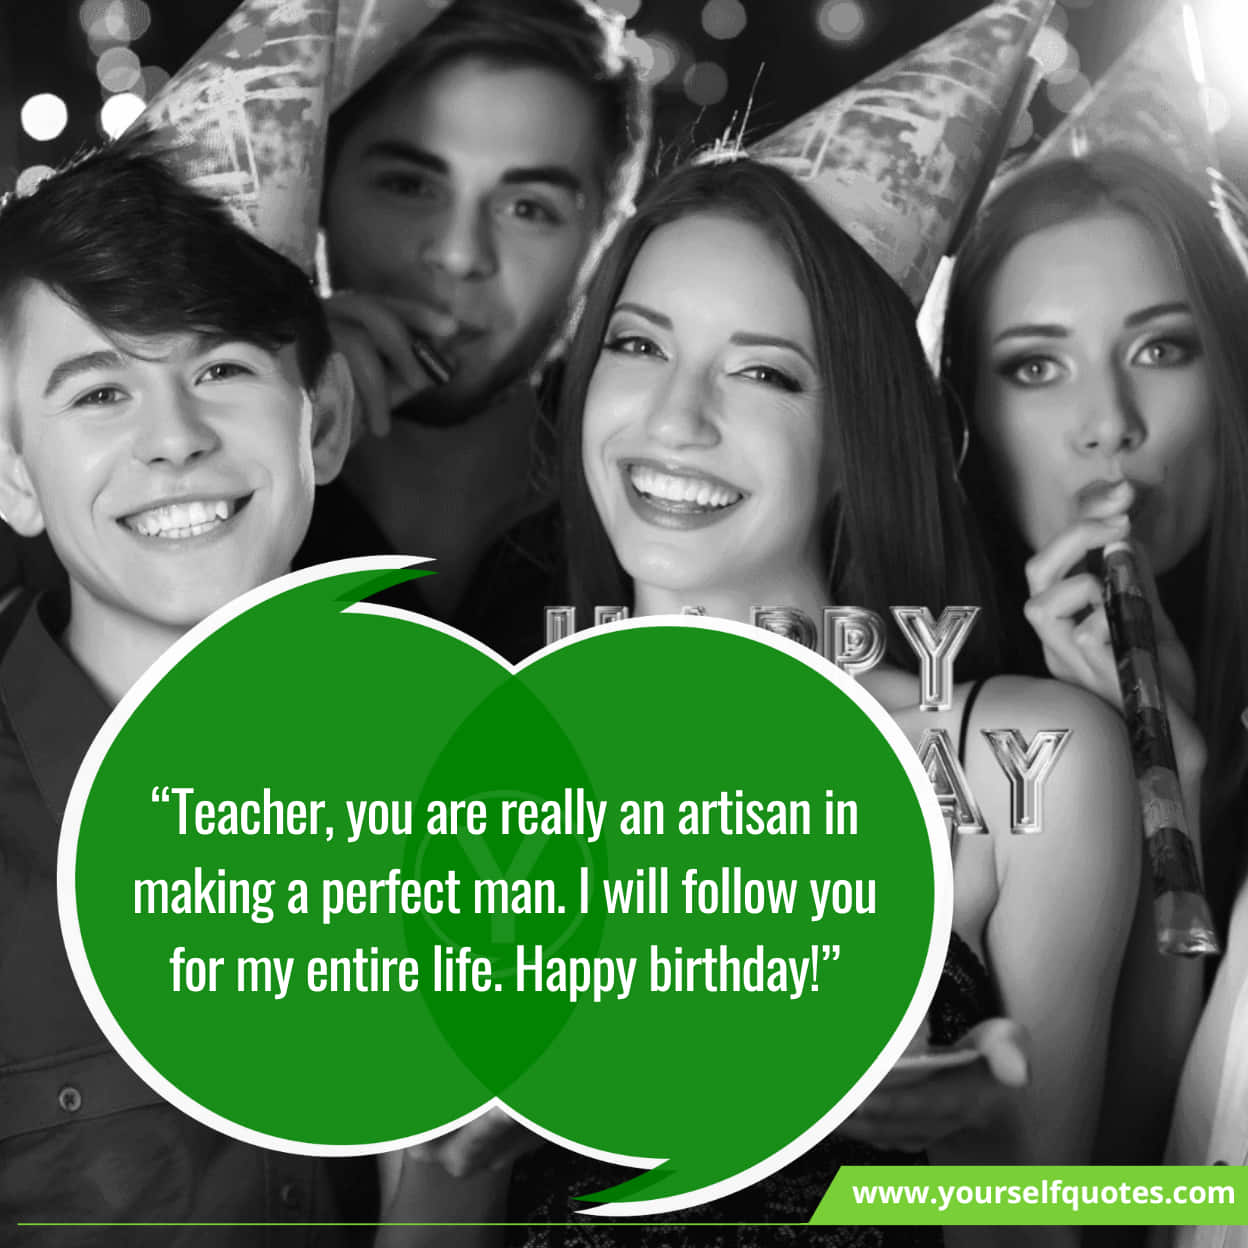 Famous Birthday Wishes Wording for Teacher